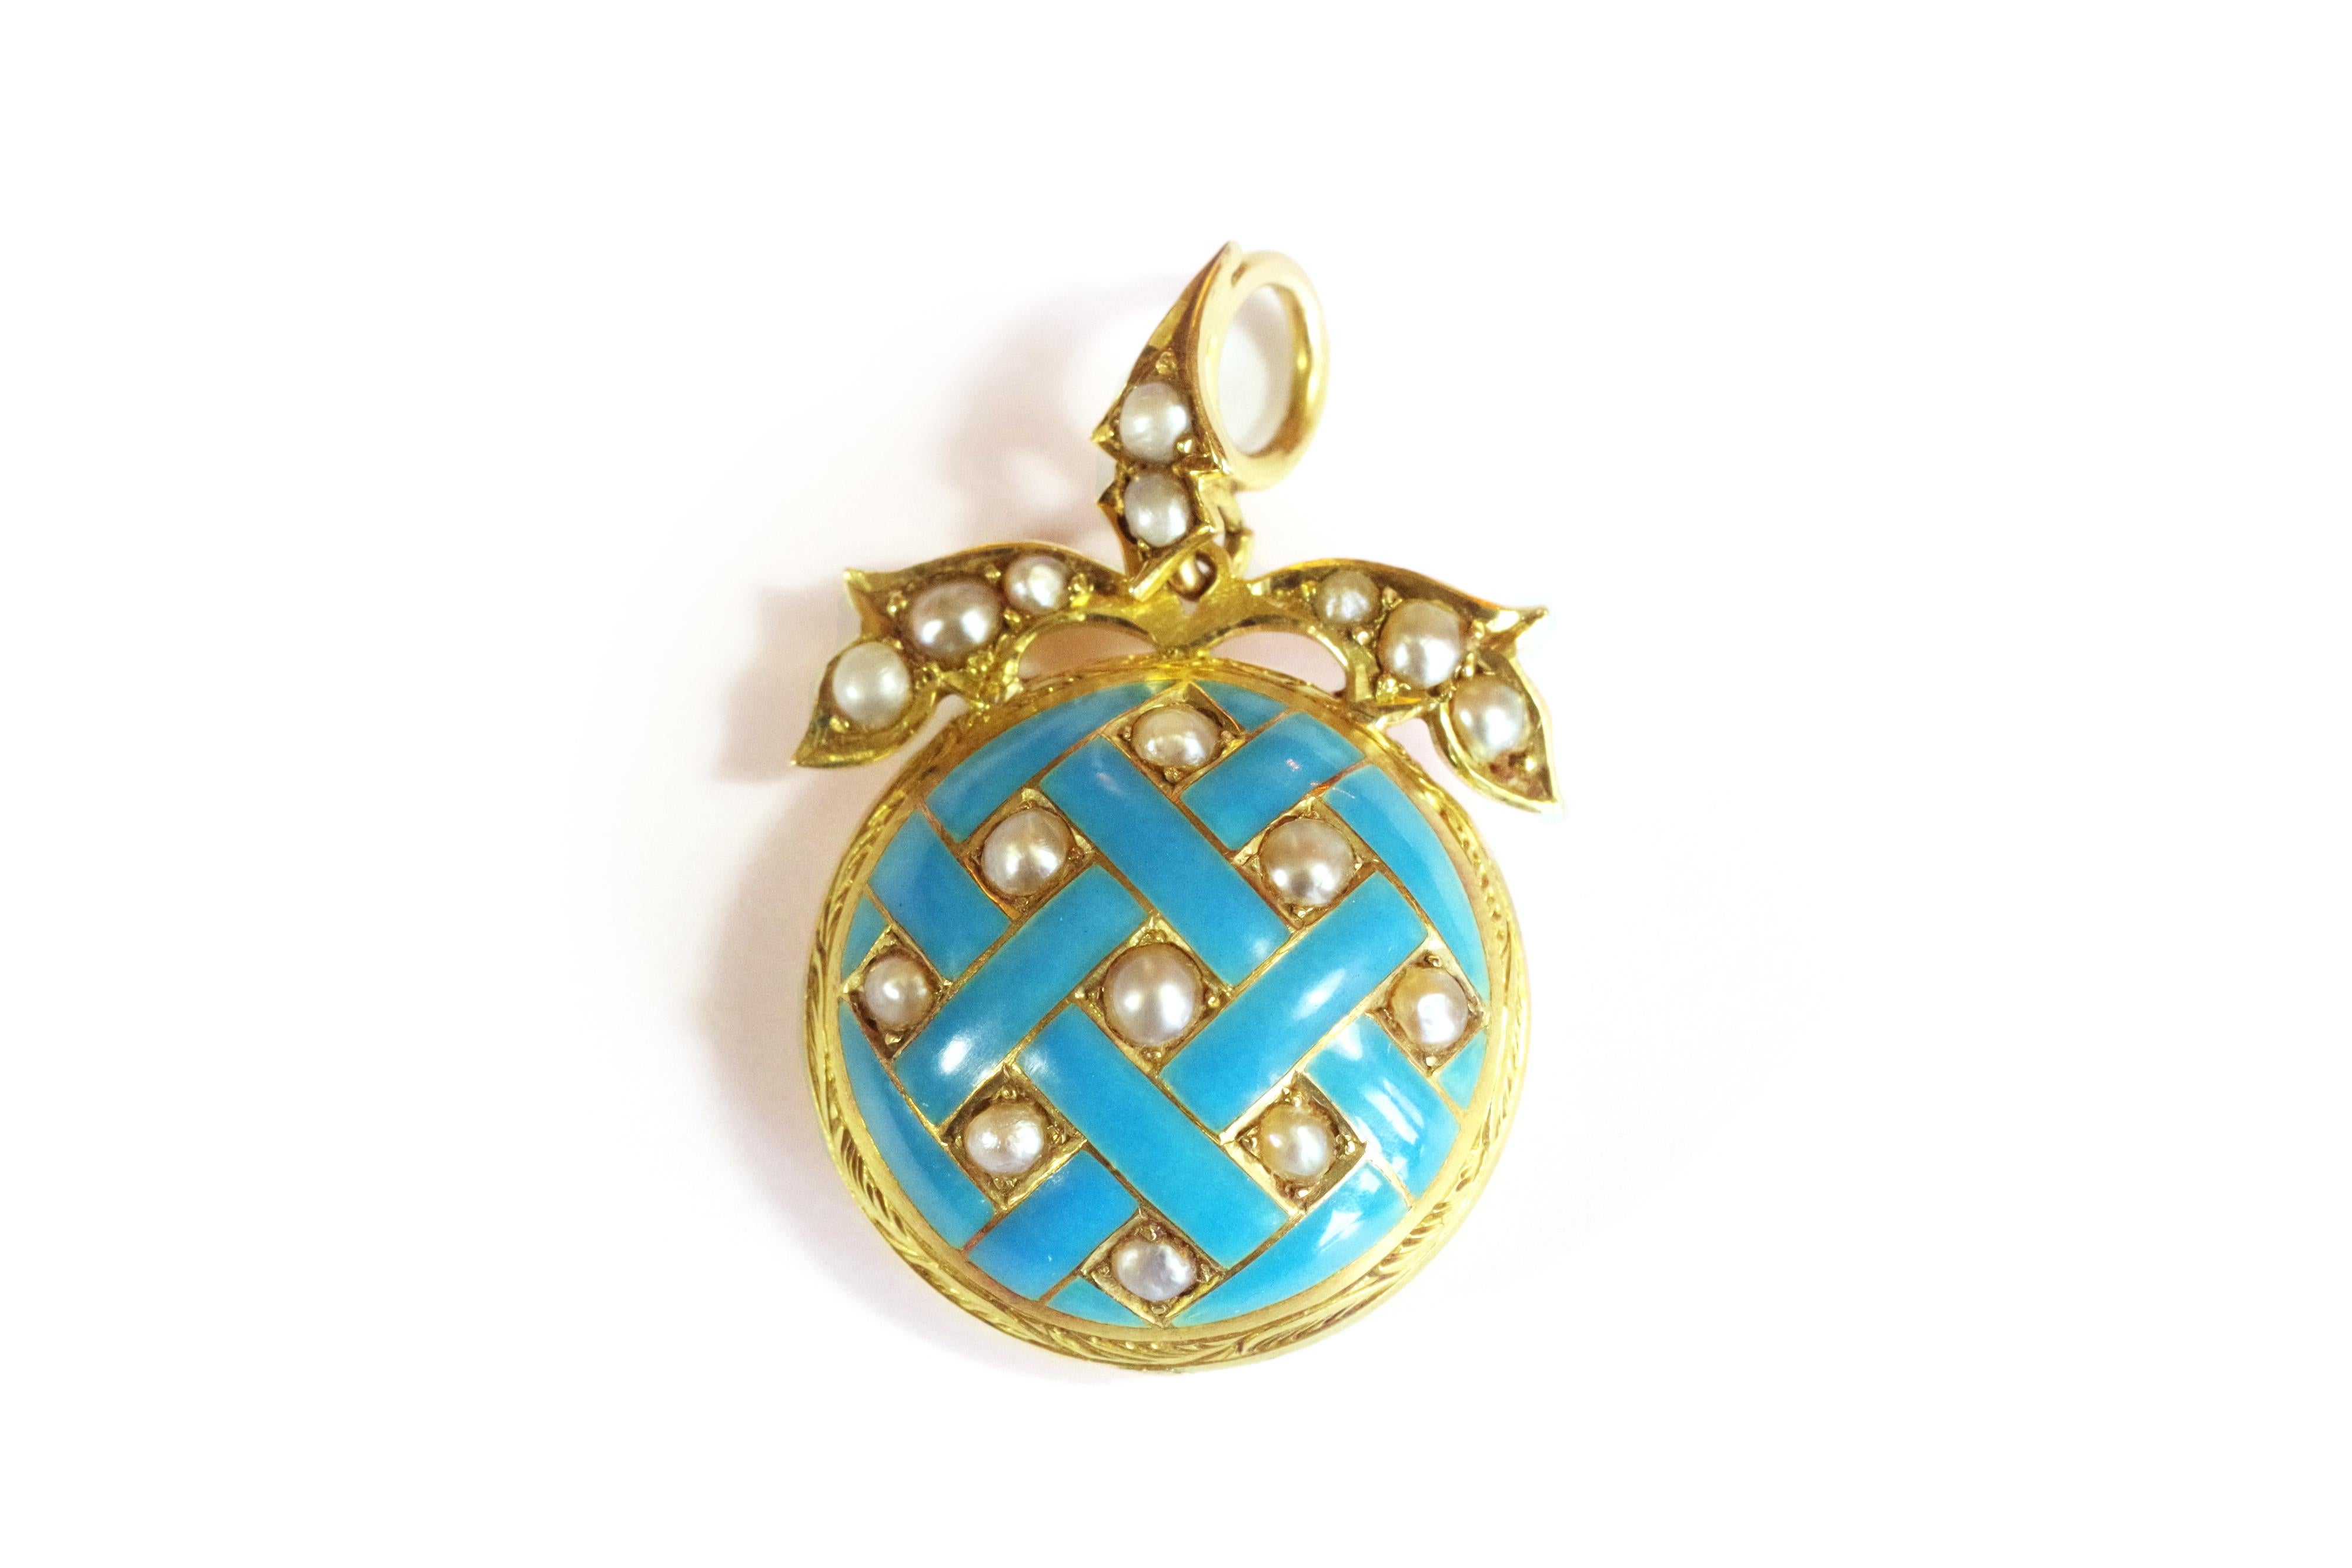 Antique enamel pearl pendant in 14 karat (585 thousandths) yellow gold. Antique pendant decorated with a trellis motif interspersed with 9 half-pearls. The whole is surmounted by a decoration of leaves adorned with 8 half-pearls. The back of the